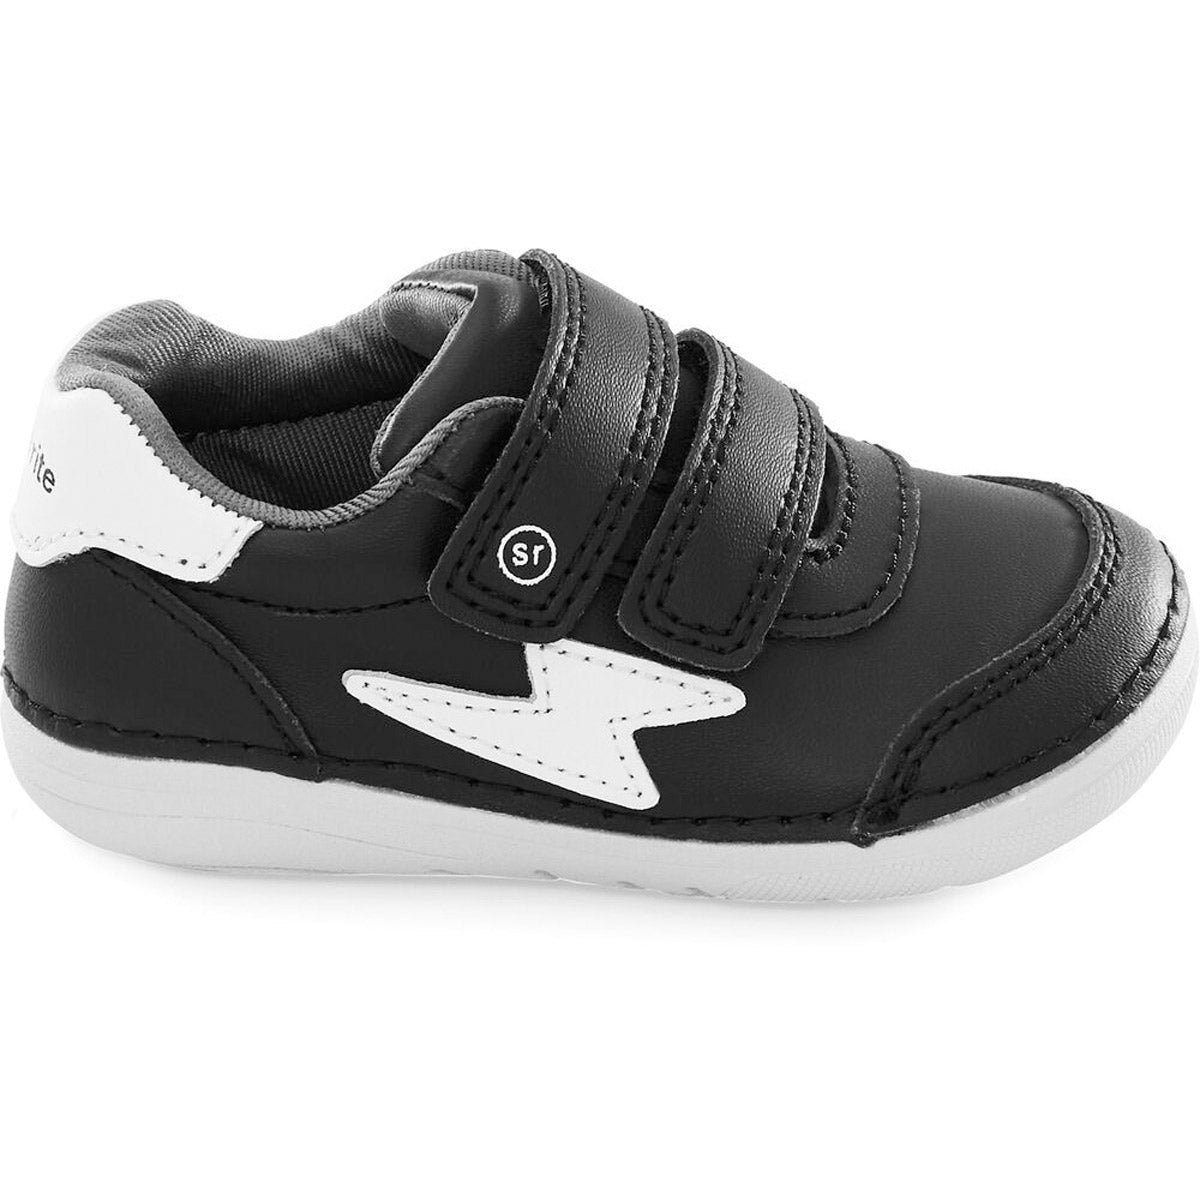 A single black and white Stride Rite SM Kennedy Black - Kids toddler's shoe with memory foam insoles and velcro straps.